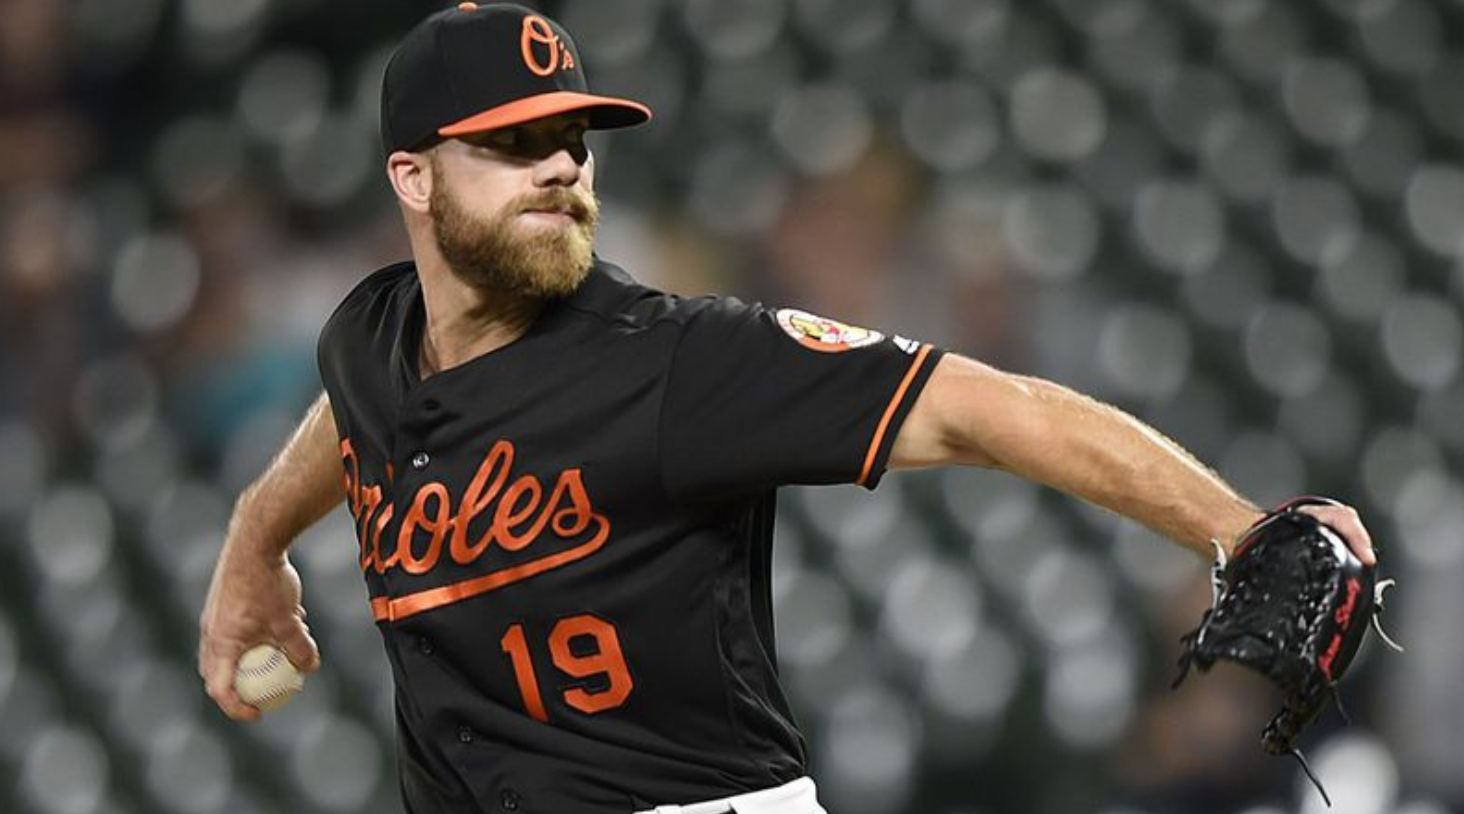 What To Do About Chris Davis - Off The Bench